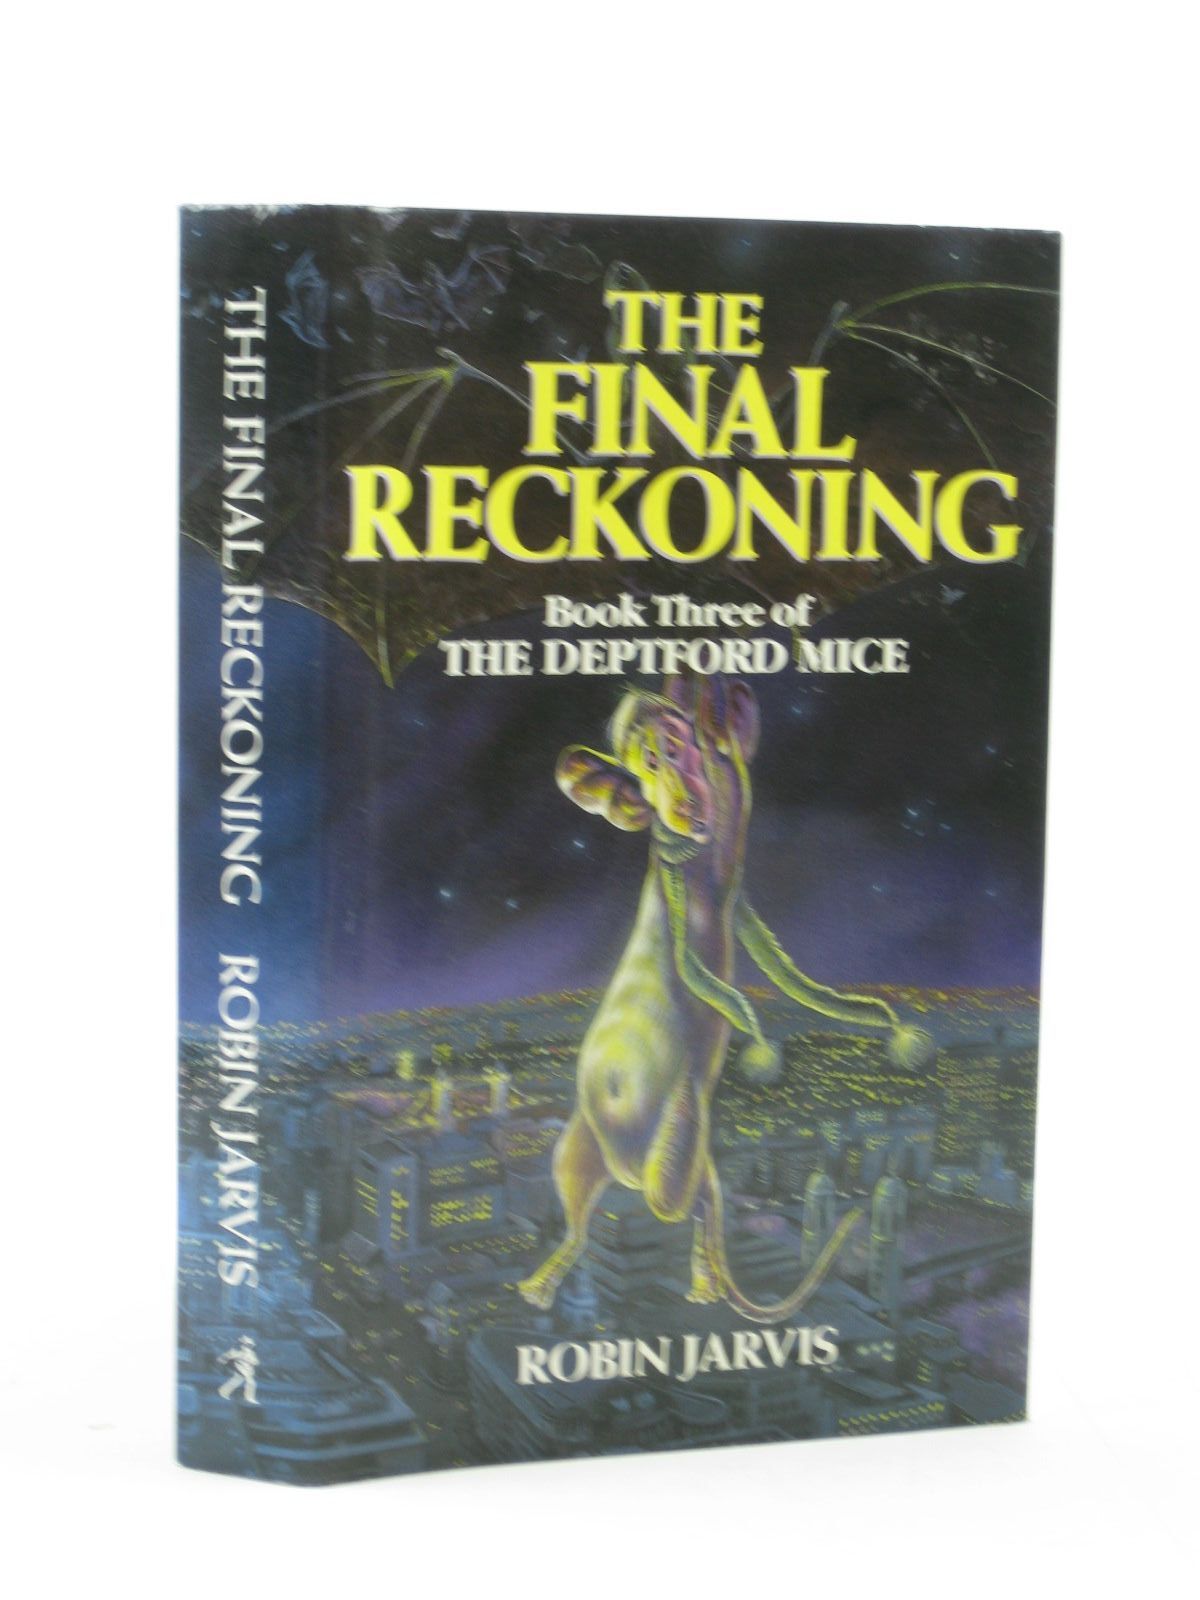 Cover of THE FINAL RECKONING by Robin Jarvis